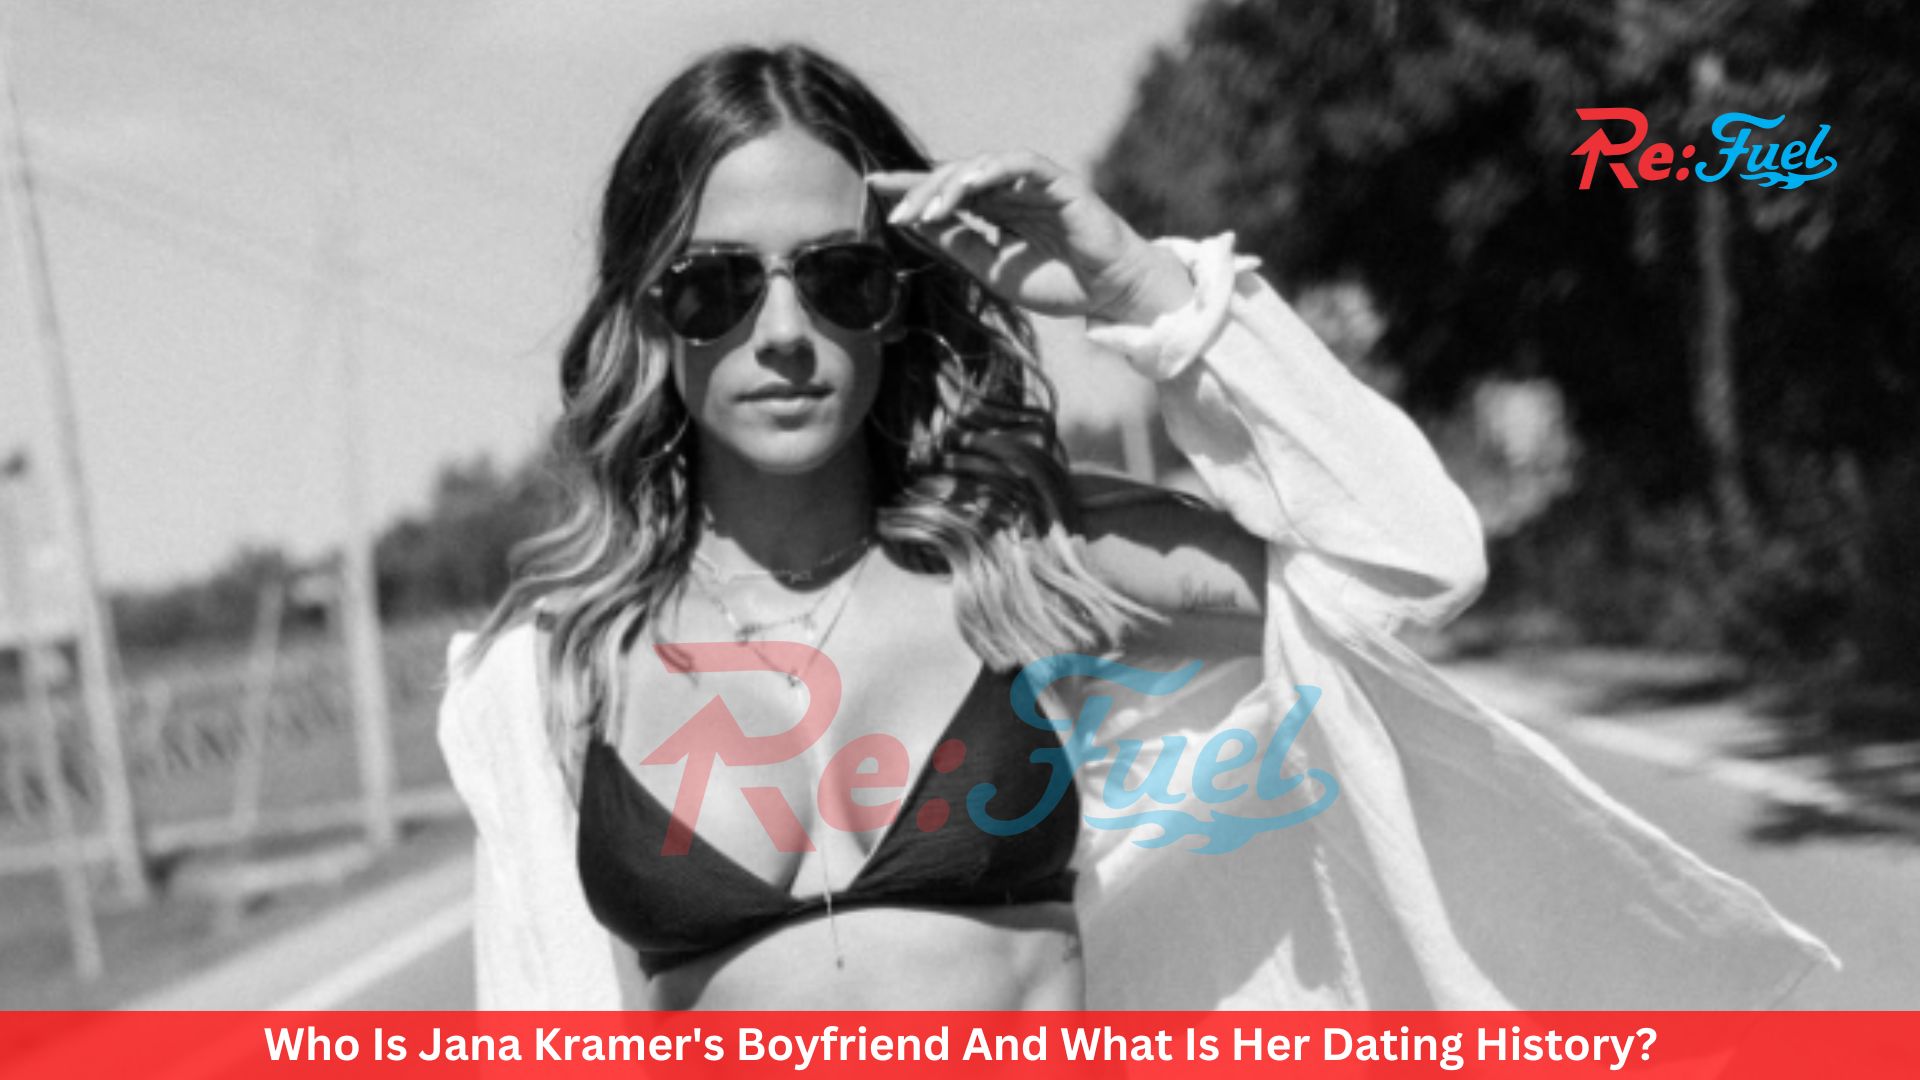 Who Is Jana Kramer's Boyfriend And What Is Her Dating History?